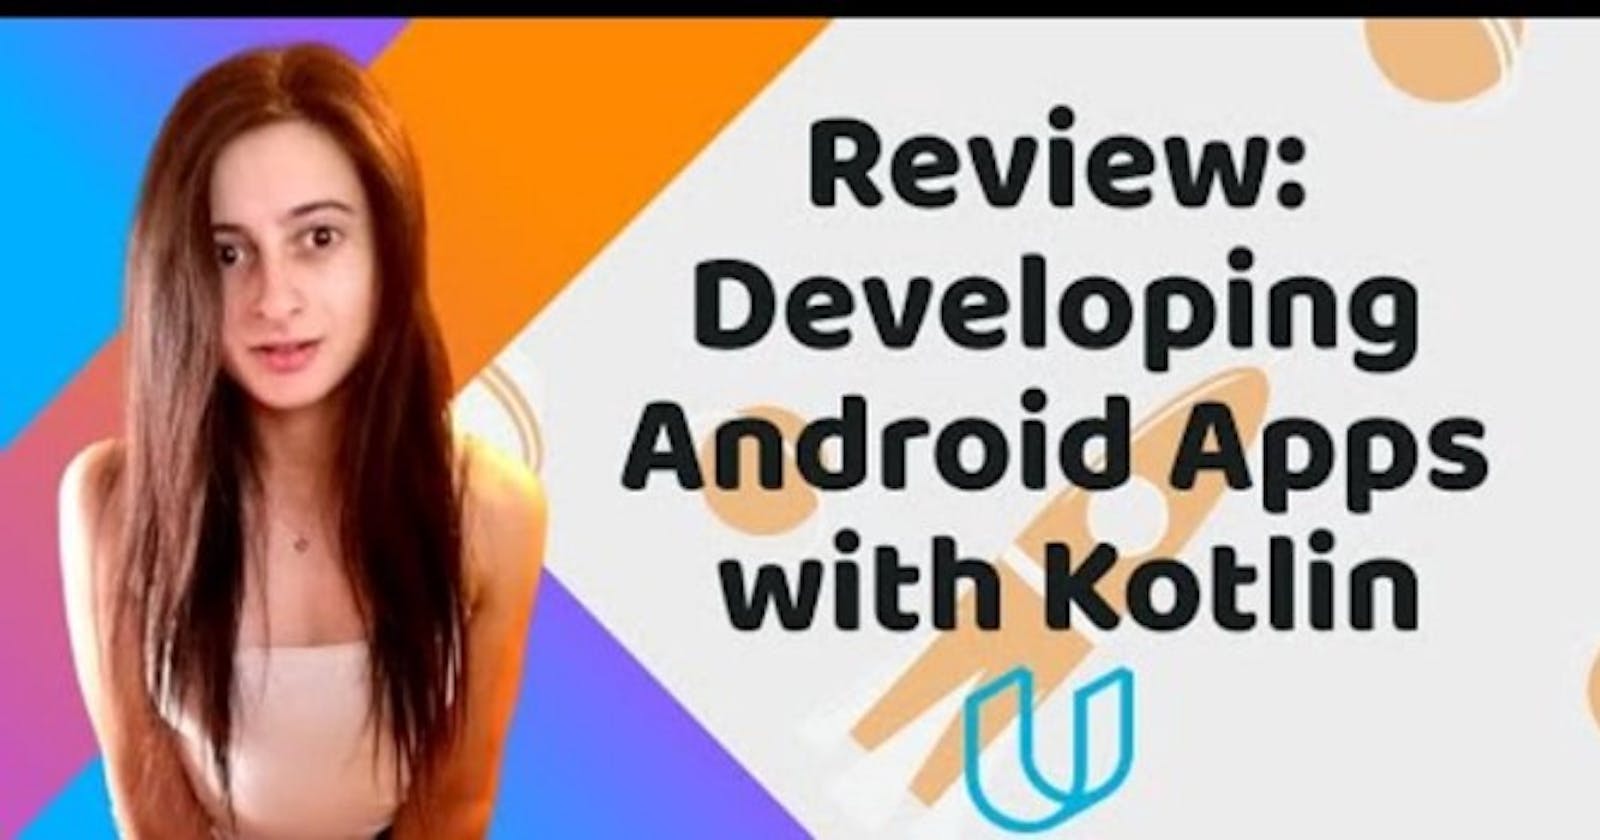 Review: Developing Android Apps with Kotlin by Google | Udacity